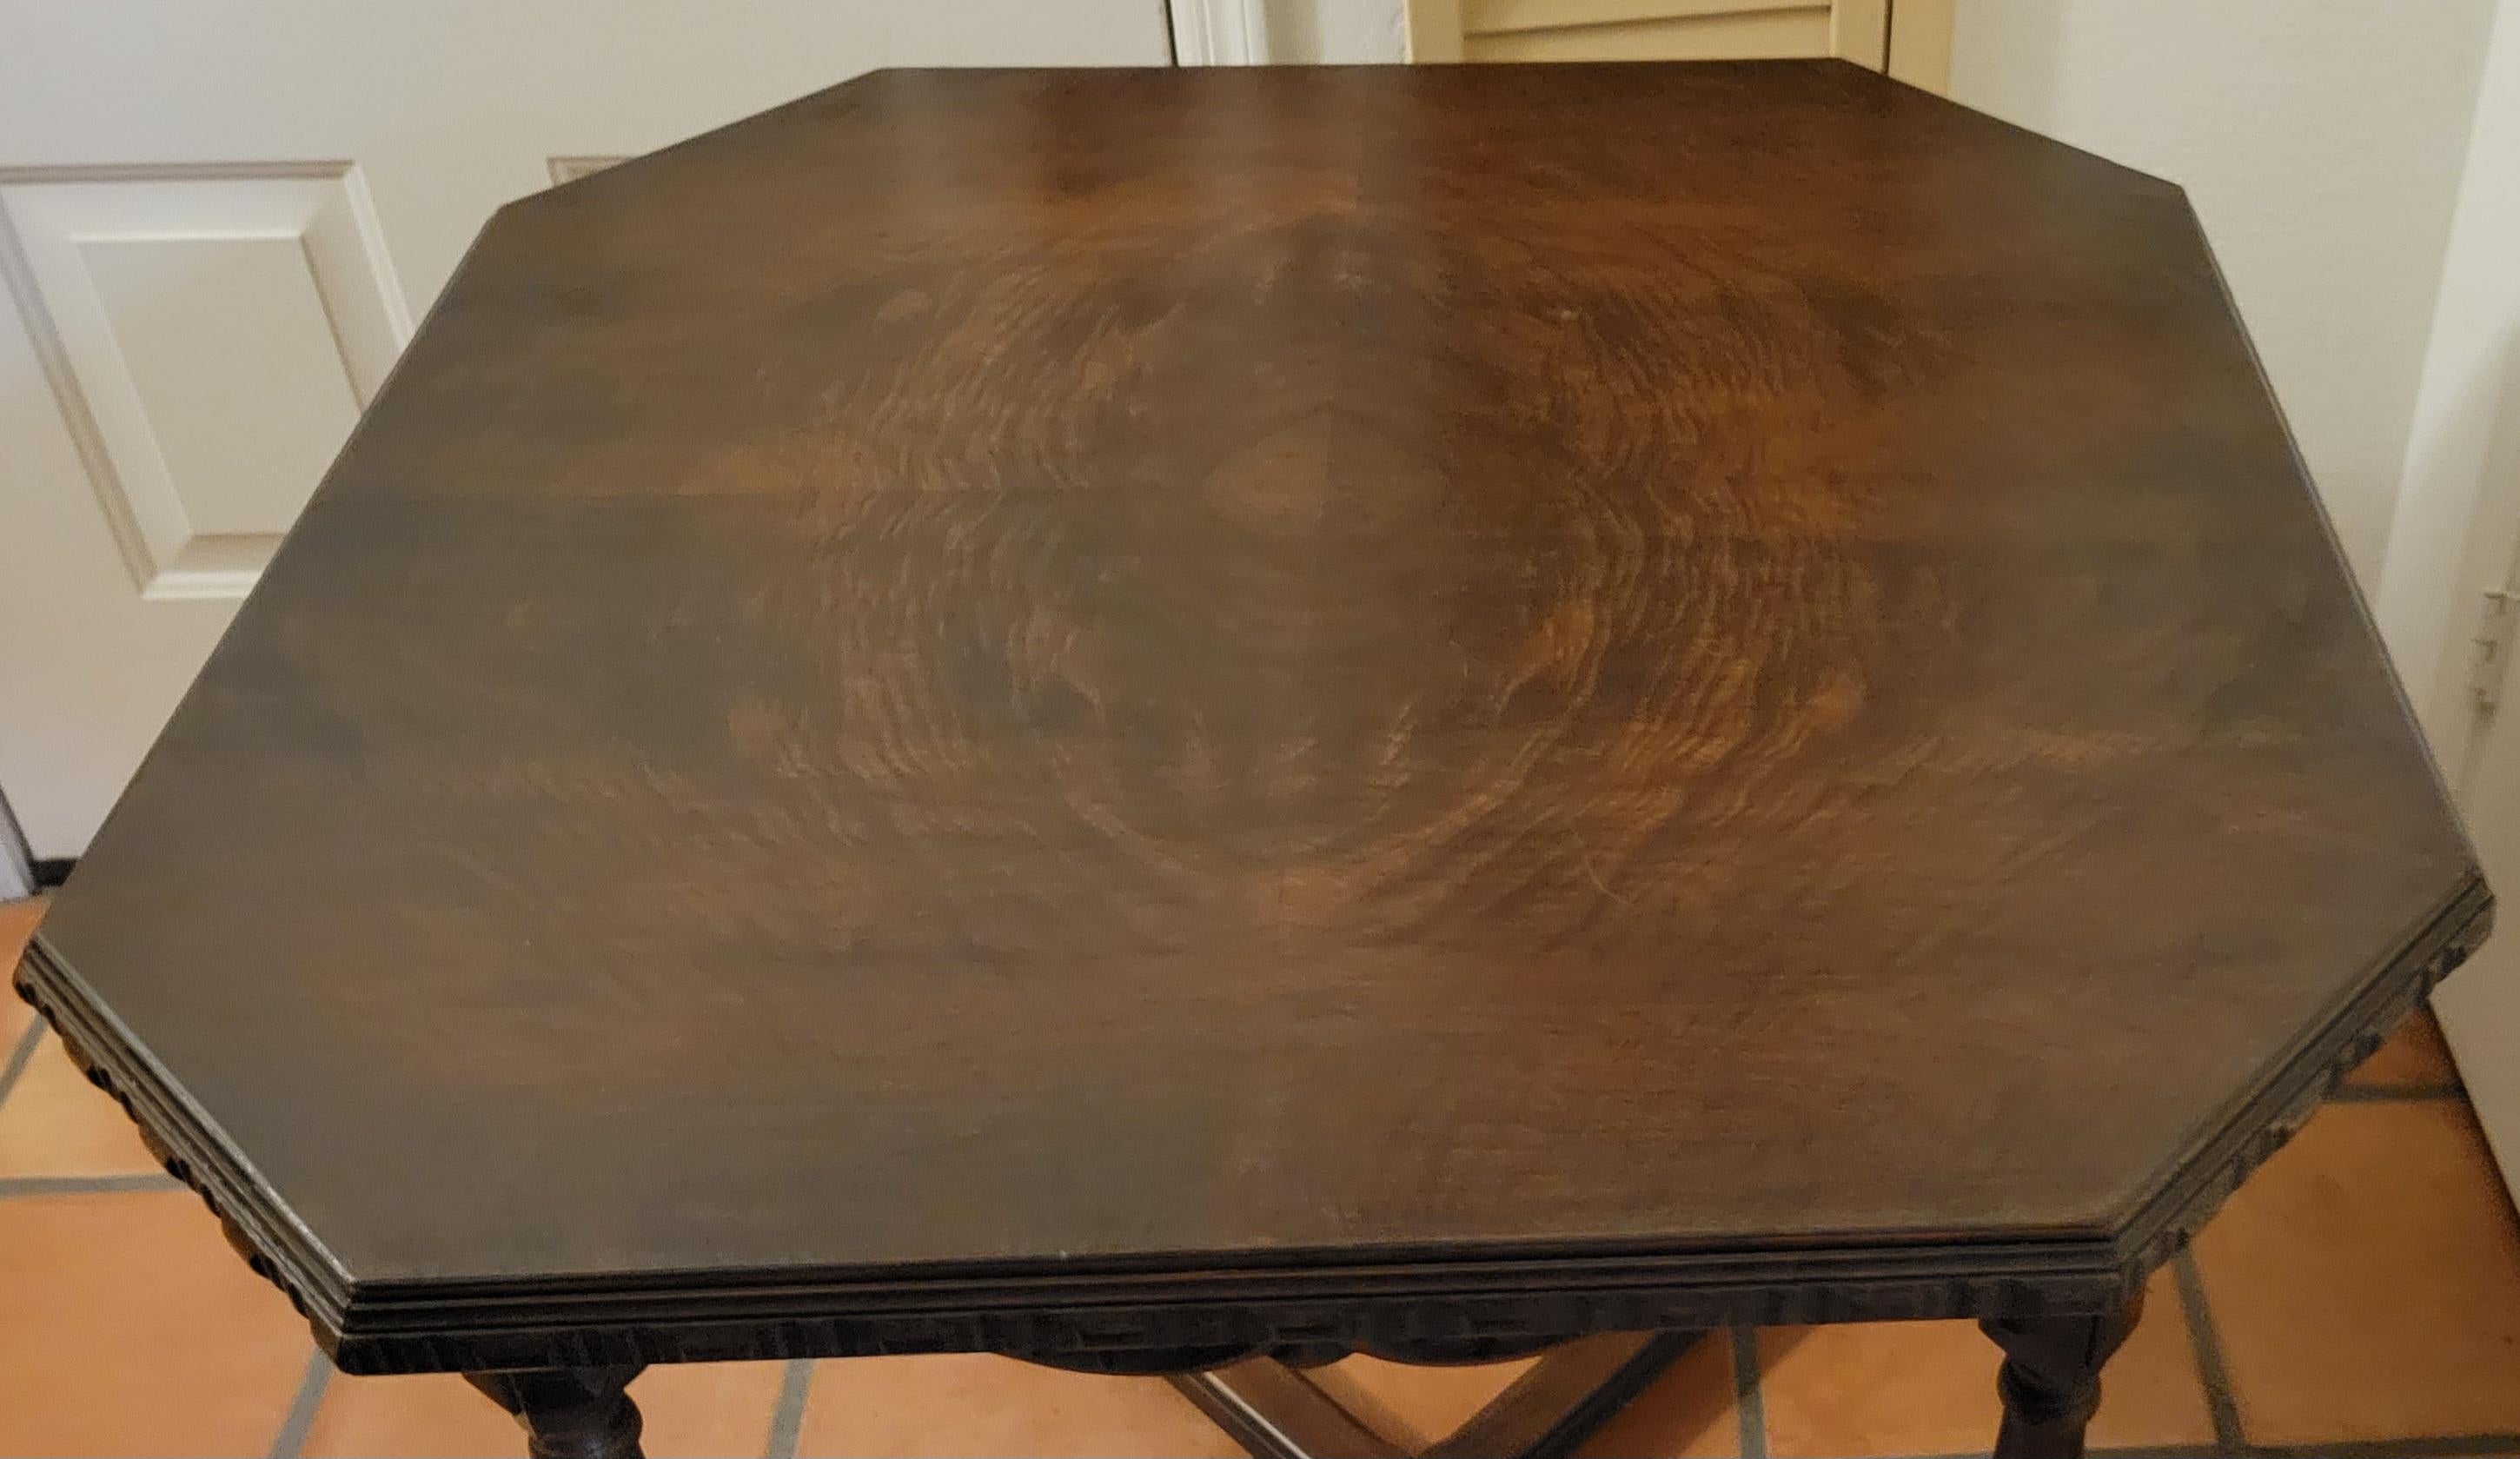 octagon table